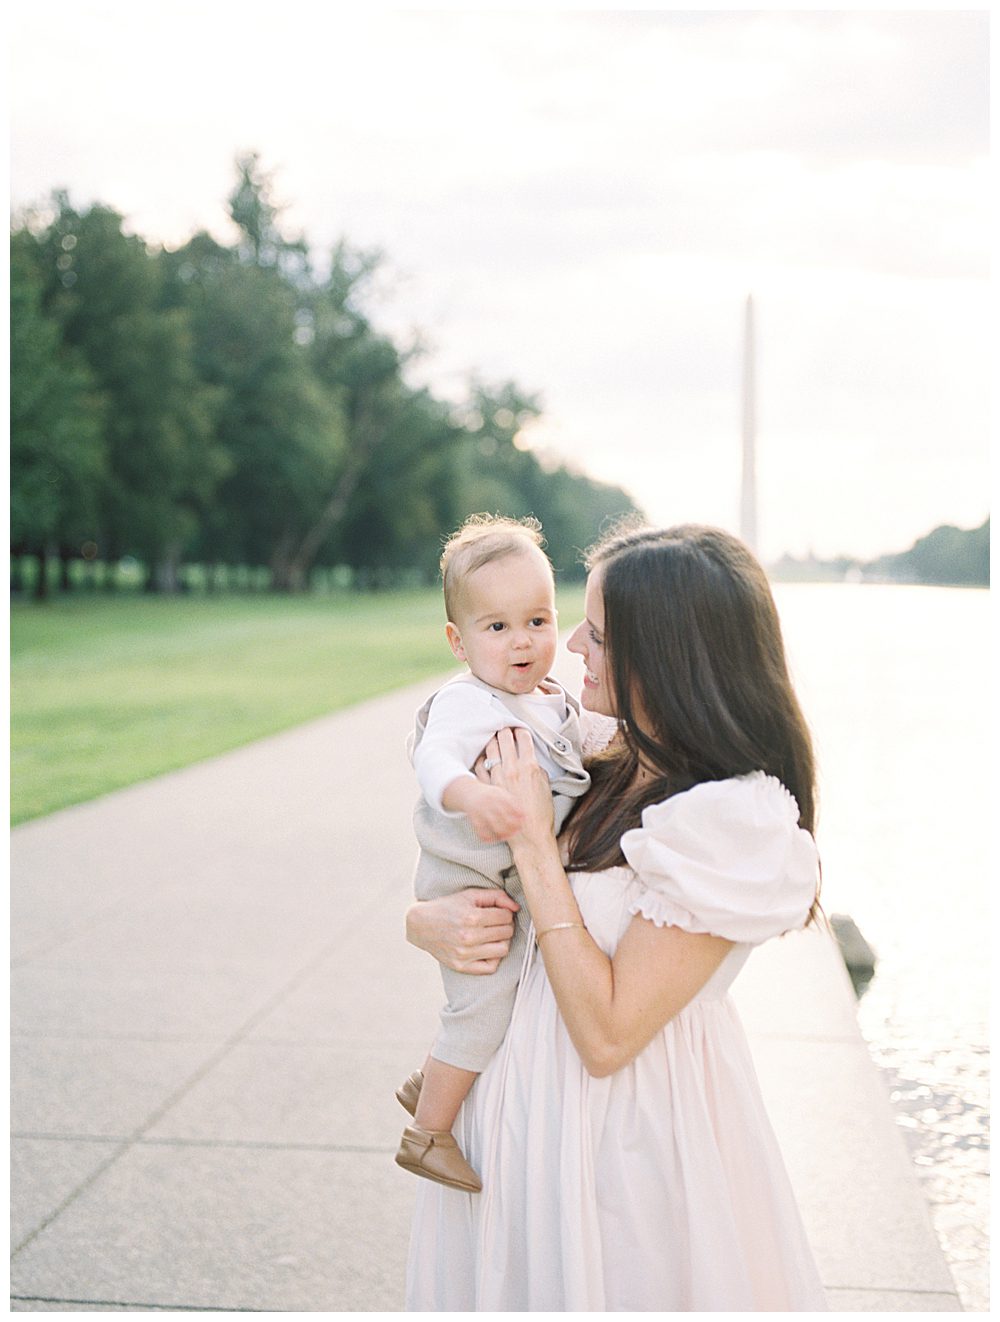 Mother smiles while holding her toddler son during DC Monuments Family Photo Session.